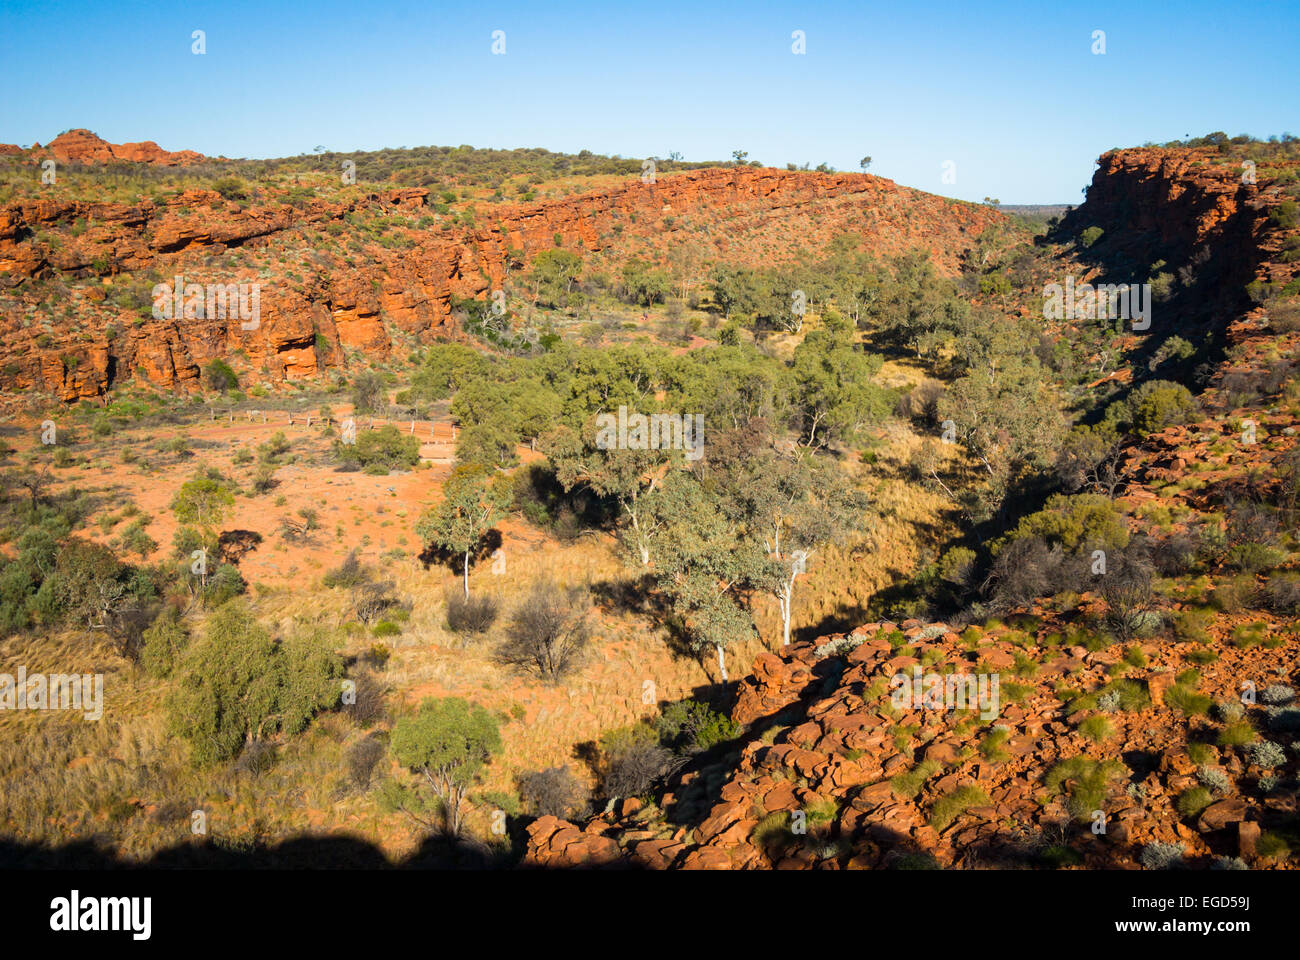 Gorge at Kathleen Springs in Watarrka National Park, Northern Territory, outback Australia Stock Photo